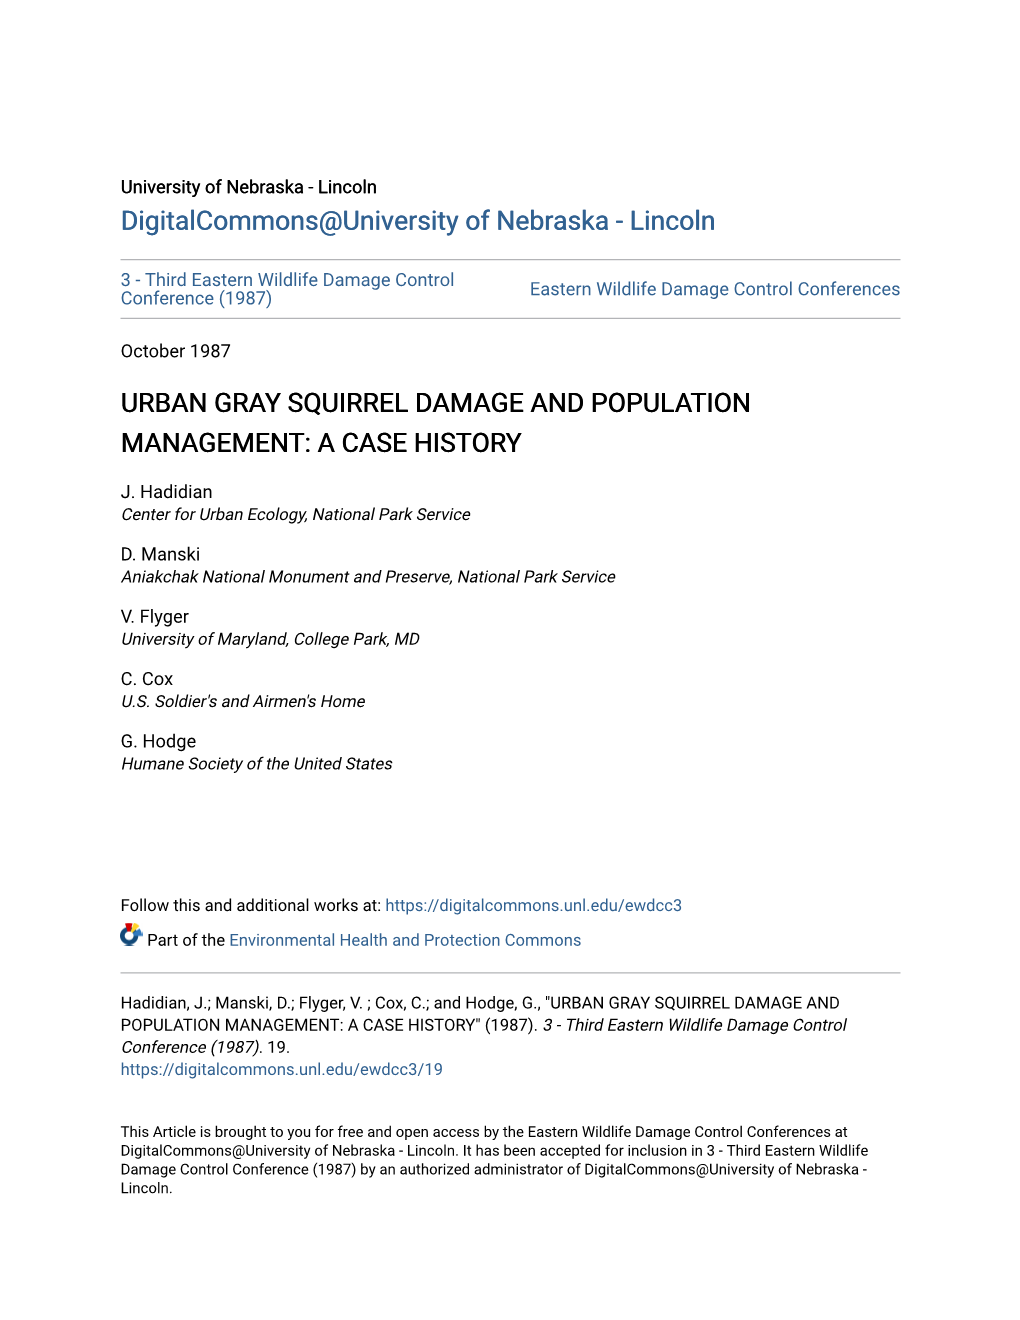 Urban Gray Squirrel Damage and Population Management: a Case History